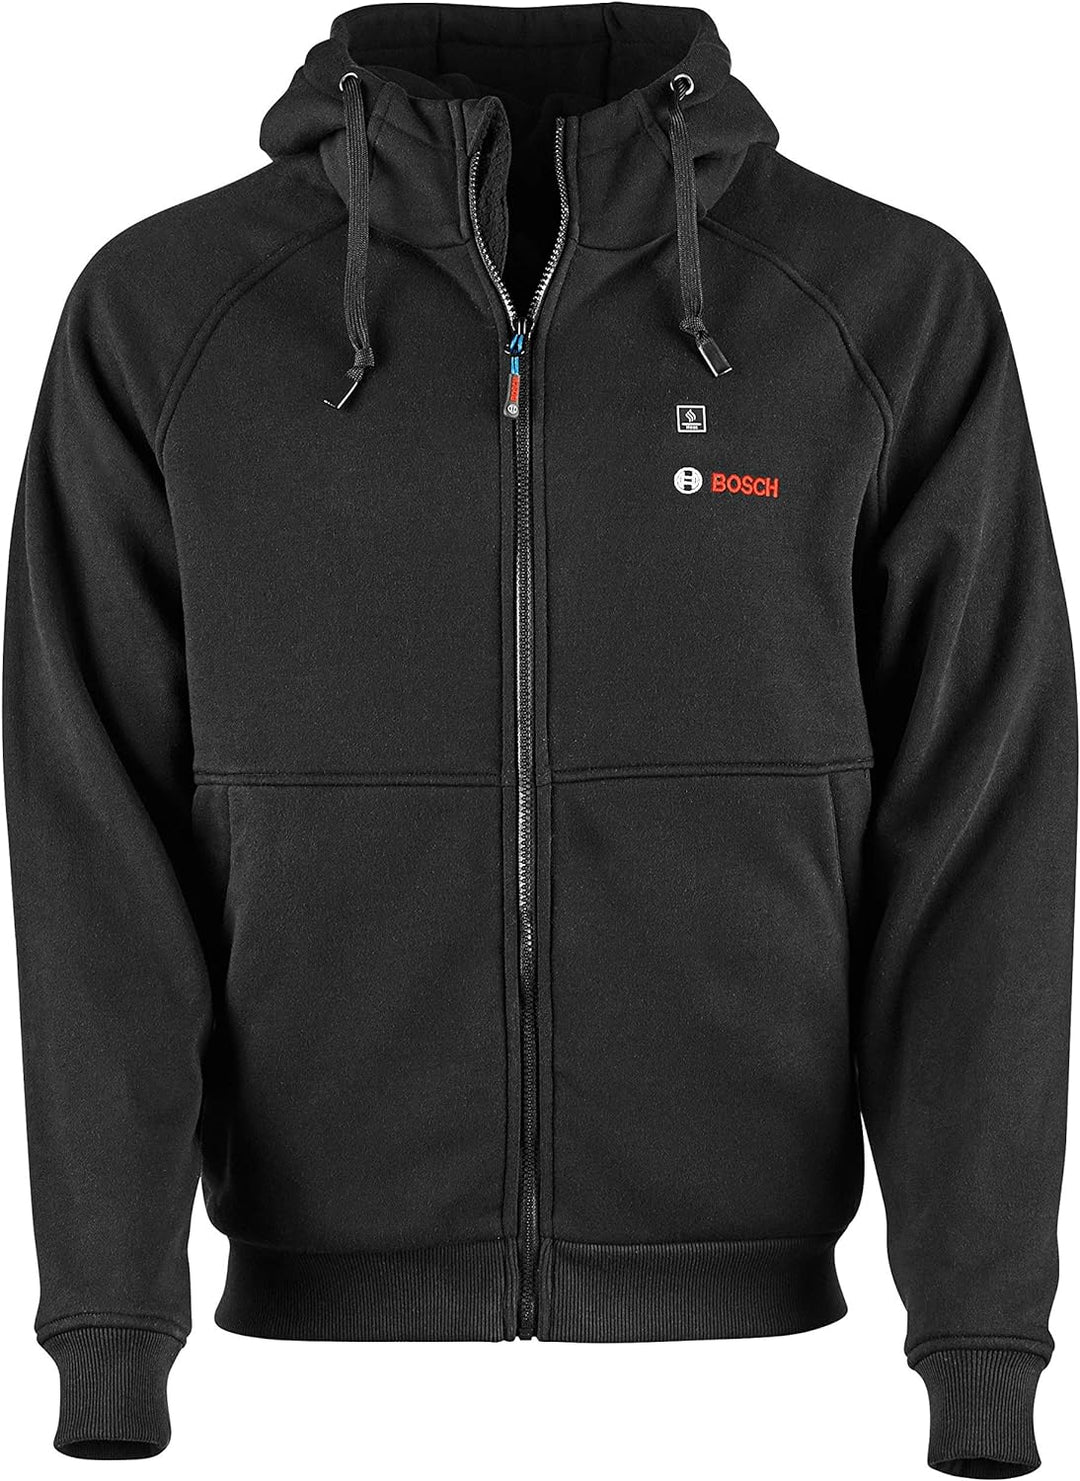 Bosch 12V Max Medium Heated Hoodie Kit with Portable Power Adapter - Black